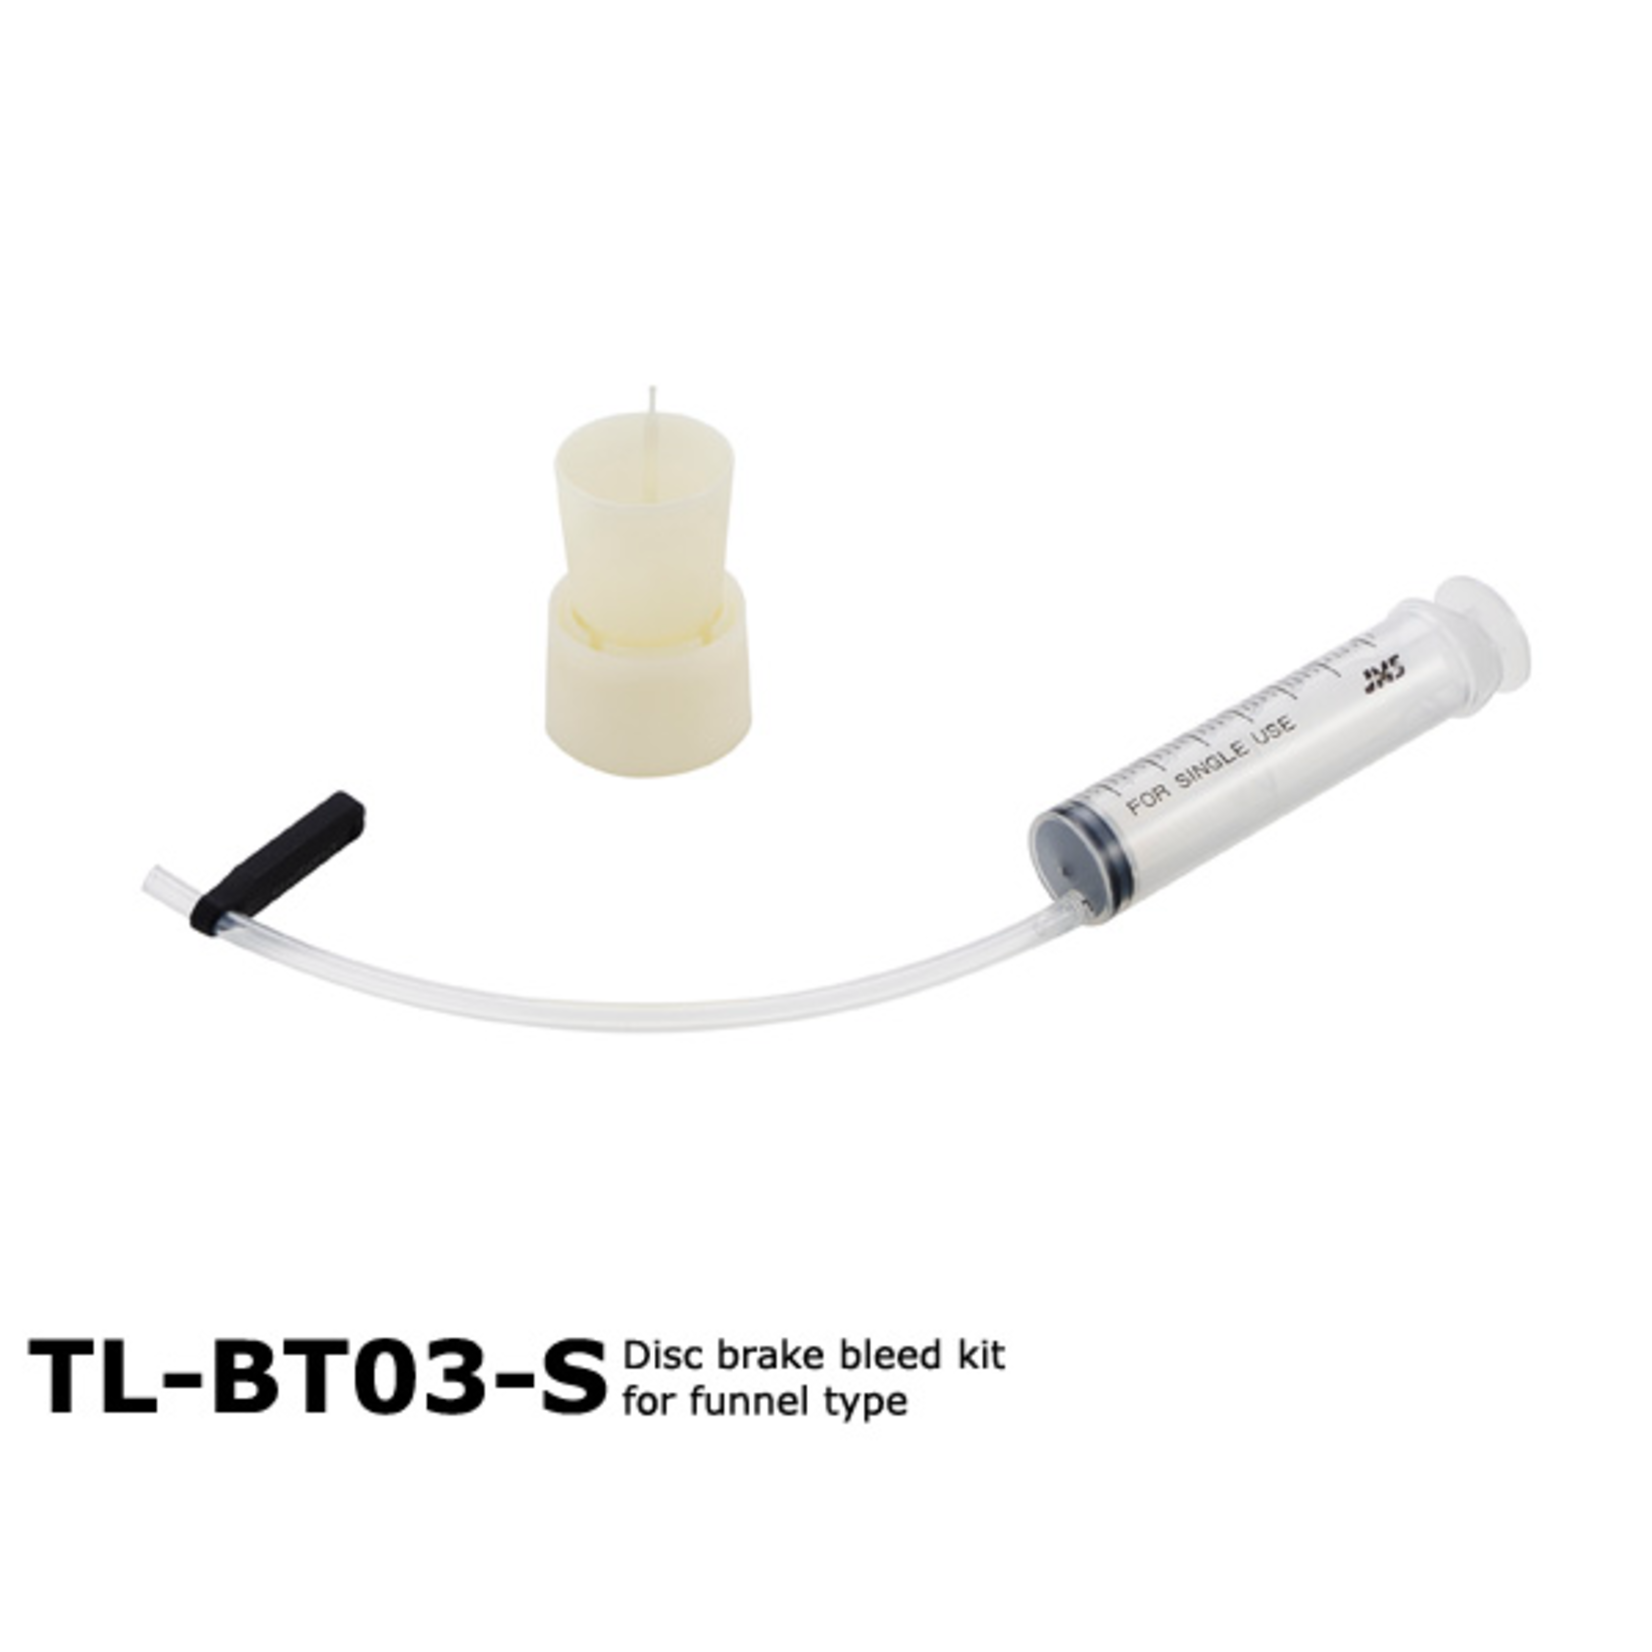 Shimano TL-BT03-S Bleed Kit for Funnel Type